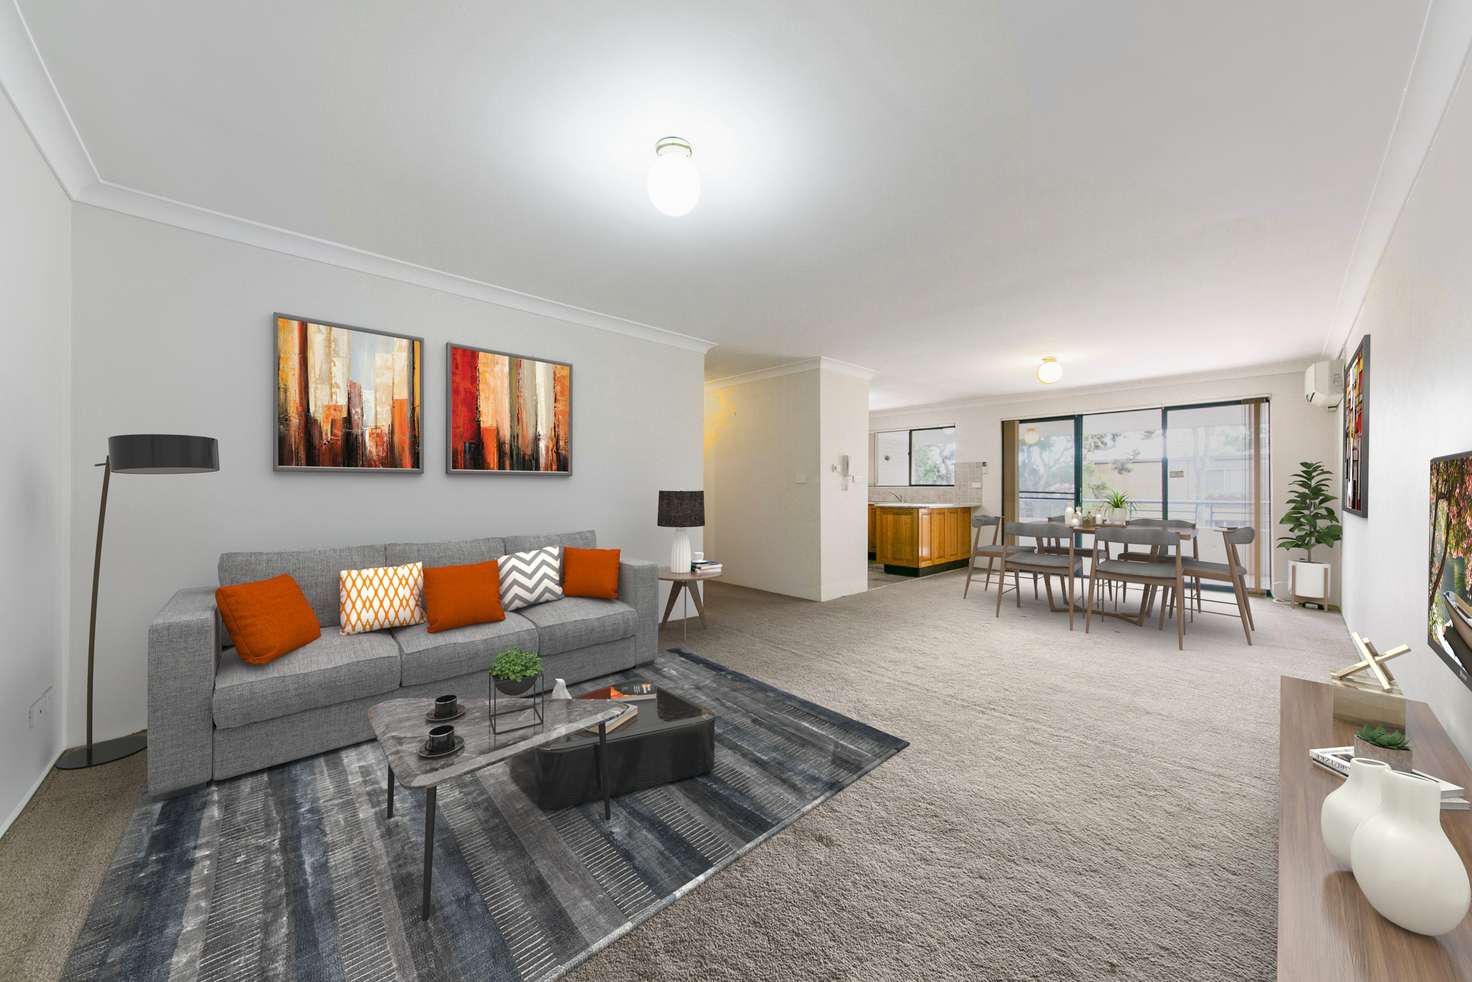 Main view of Homely unit listing, 20/3-7 Burford St, Merrylands NSW 2160